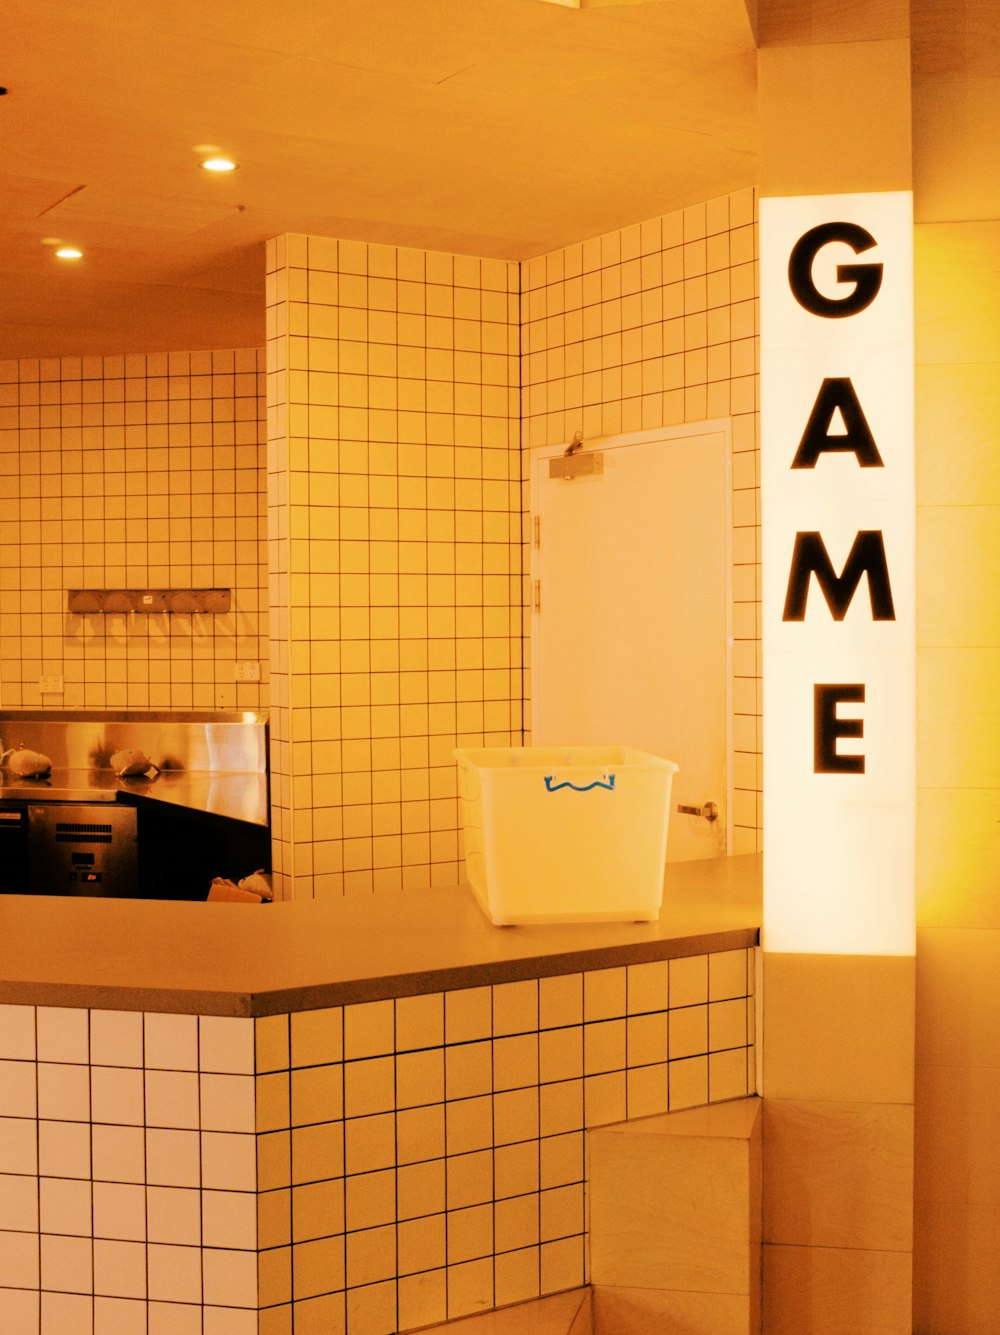 a kitchen with tiled walls and a game sign on the wall